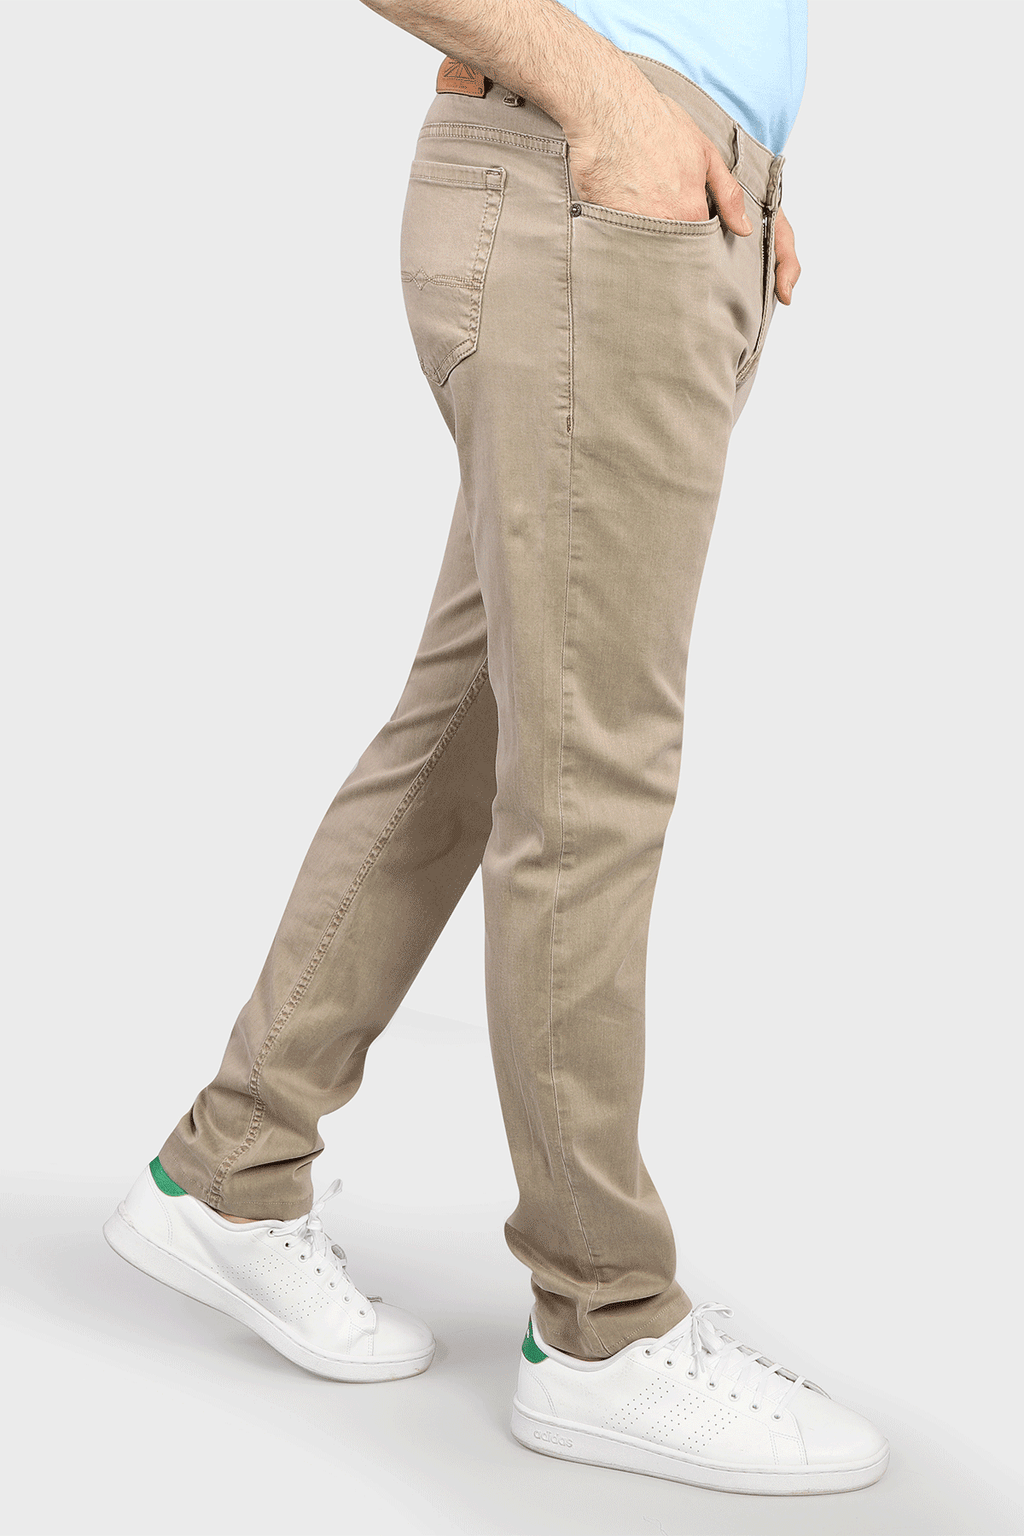 Five Pocket Stretch Pants in Oatmeal